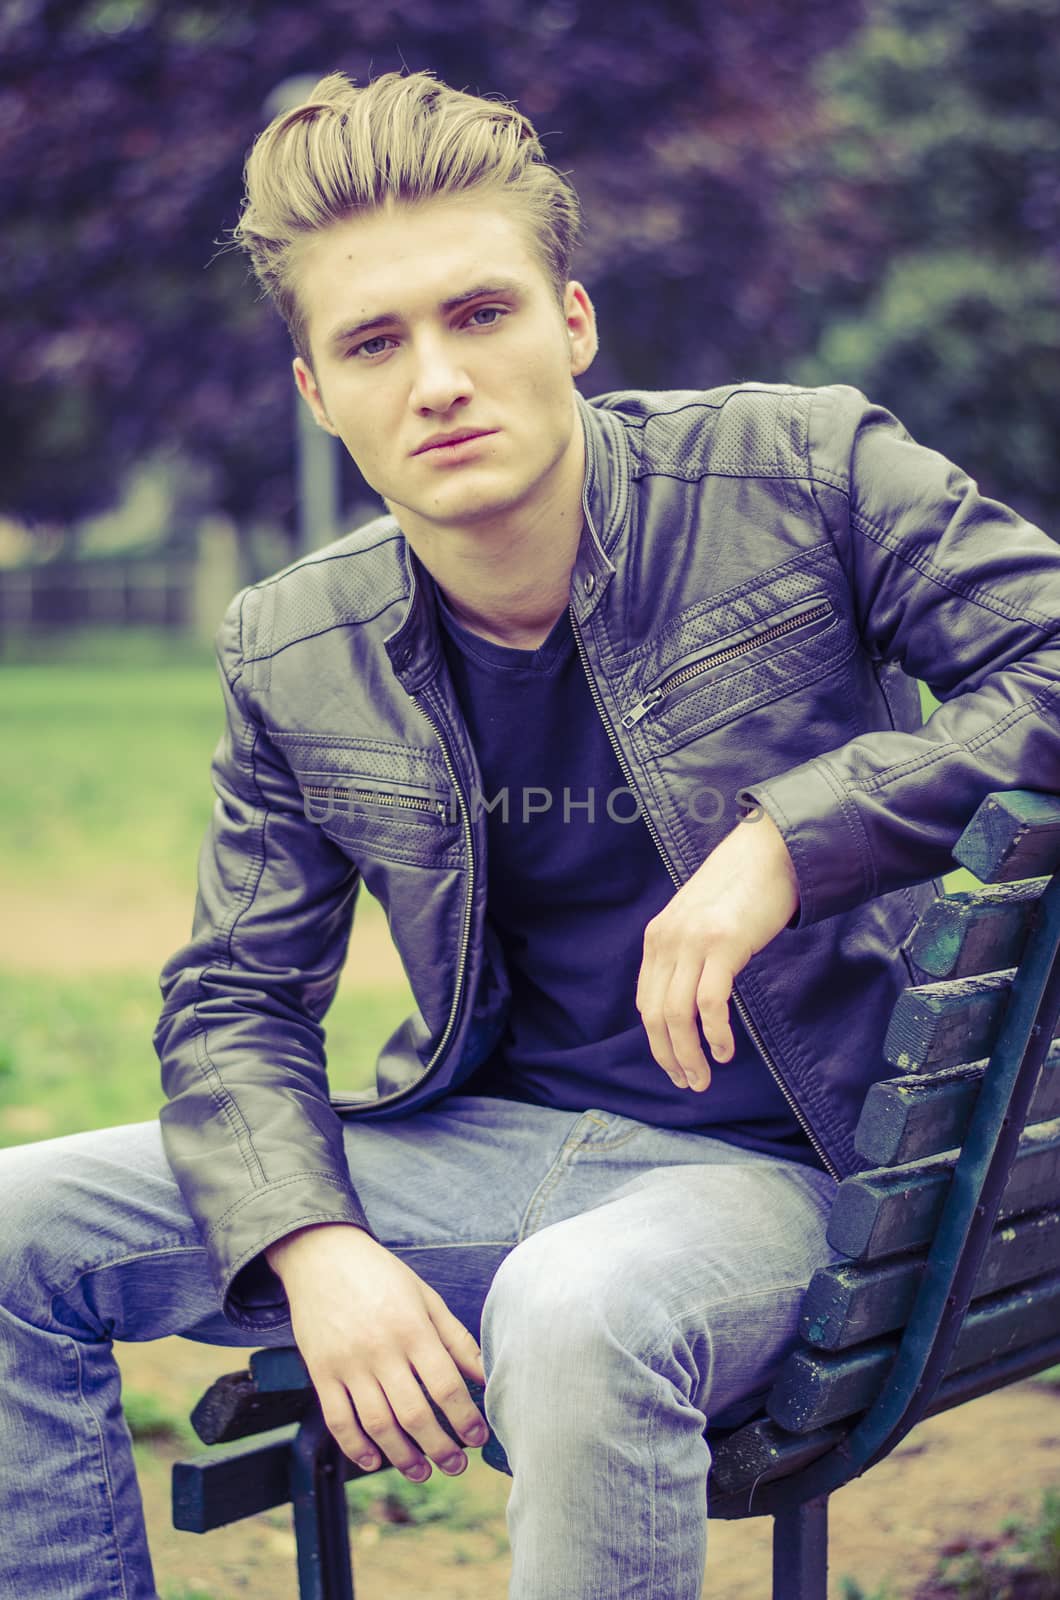 Handsome blond young man sitting on park bench by artofphoto